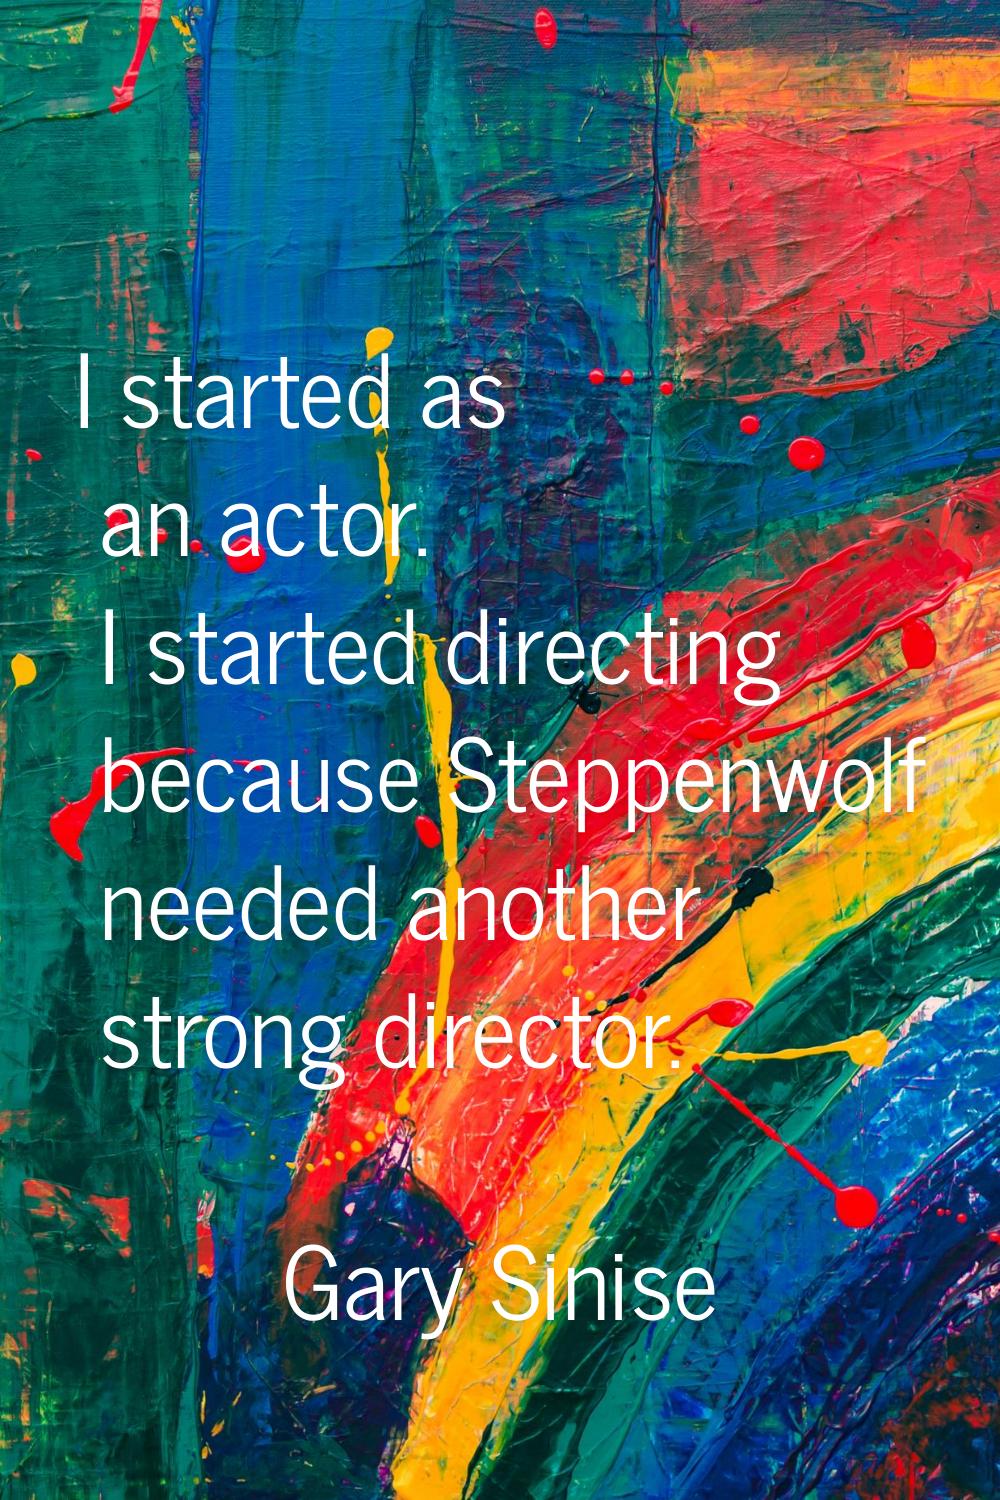 I started as an actor. I started directing because Steppenwolf needed another strong director.